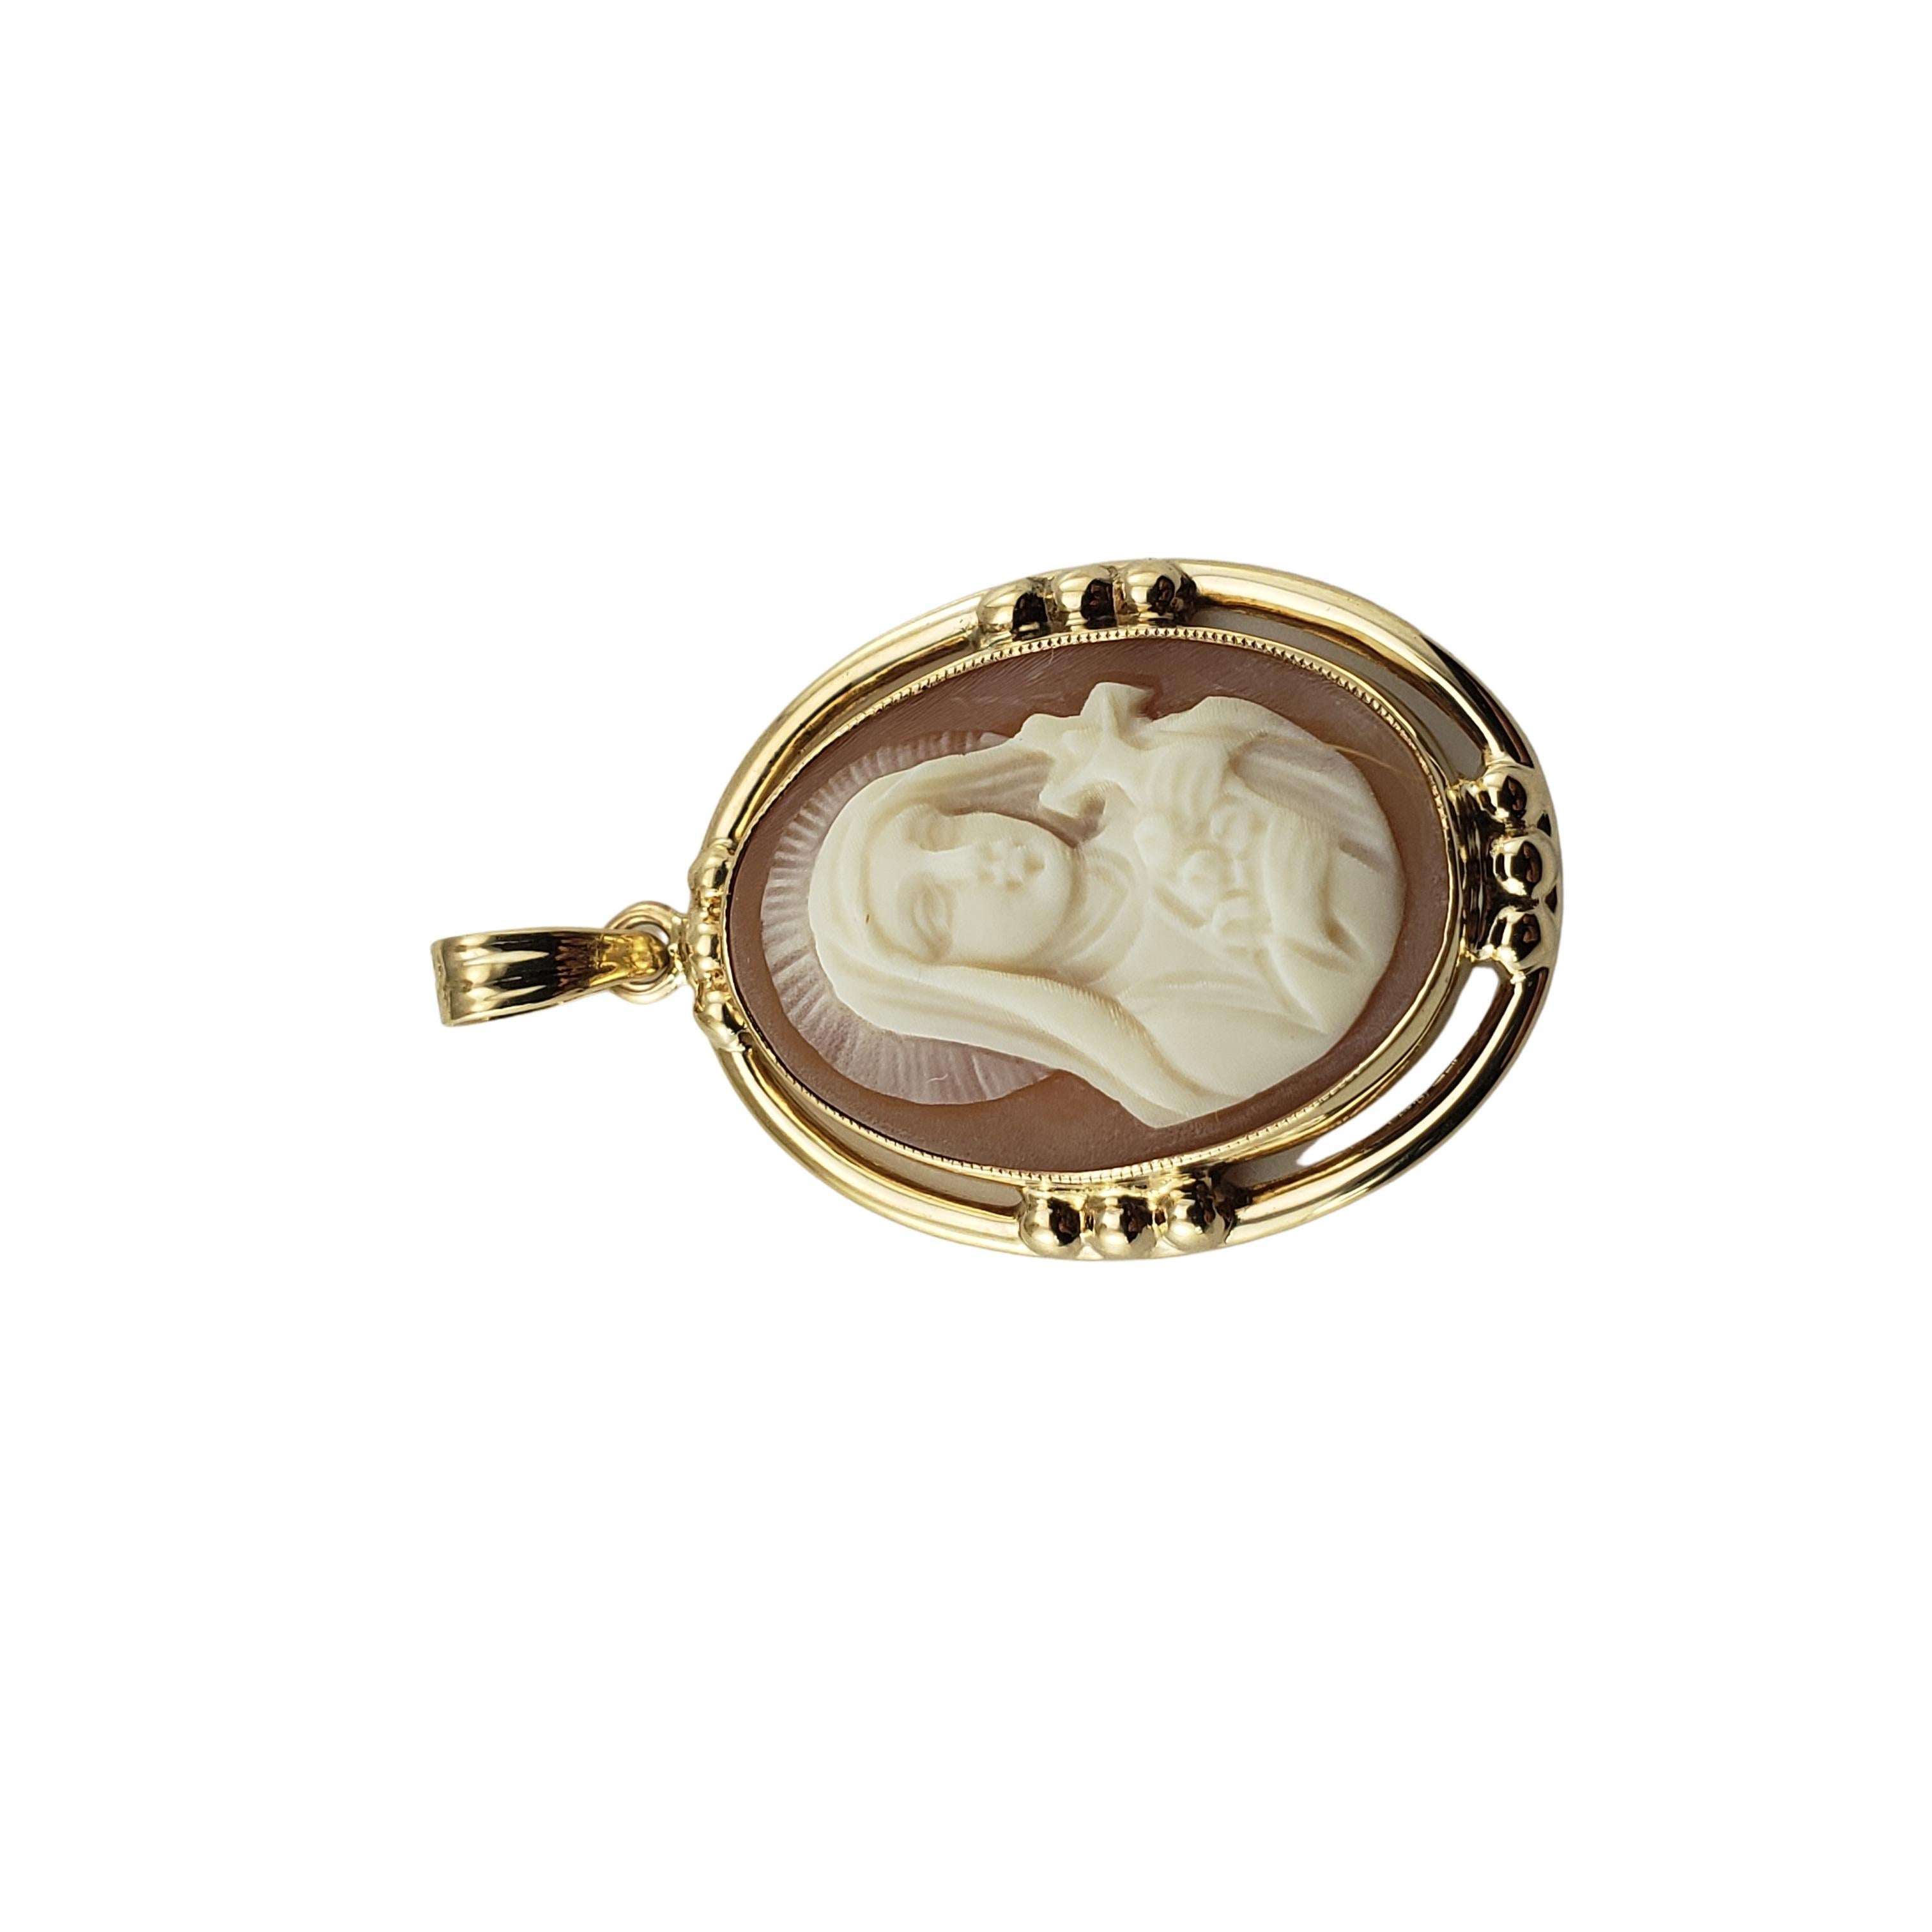 Vintage 14 Karat Yellow Gold St. Therese of Lisieux Cameo Pendant-

This lovely pendant features a St. Therese of Lisieux cameo set in classic 14K yellow gold.

Size: 24 mm x 17 mm

Weight: 1.6 dwt. / 2.6 gr.

Stamped: 14K CROSE

Very good